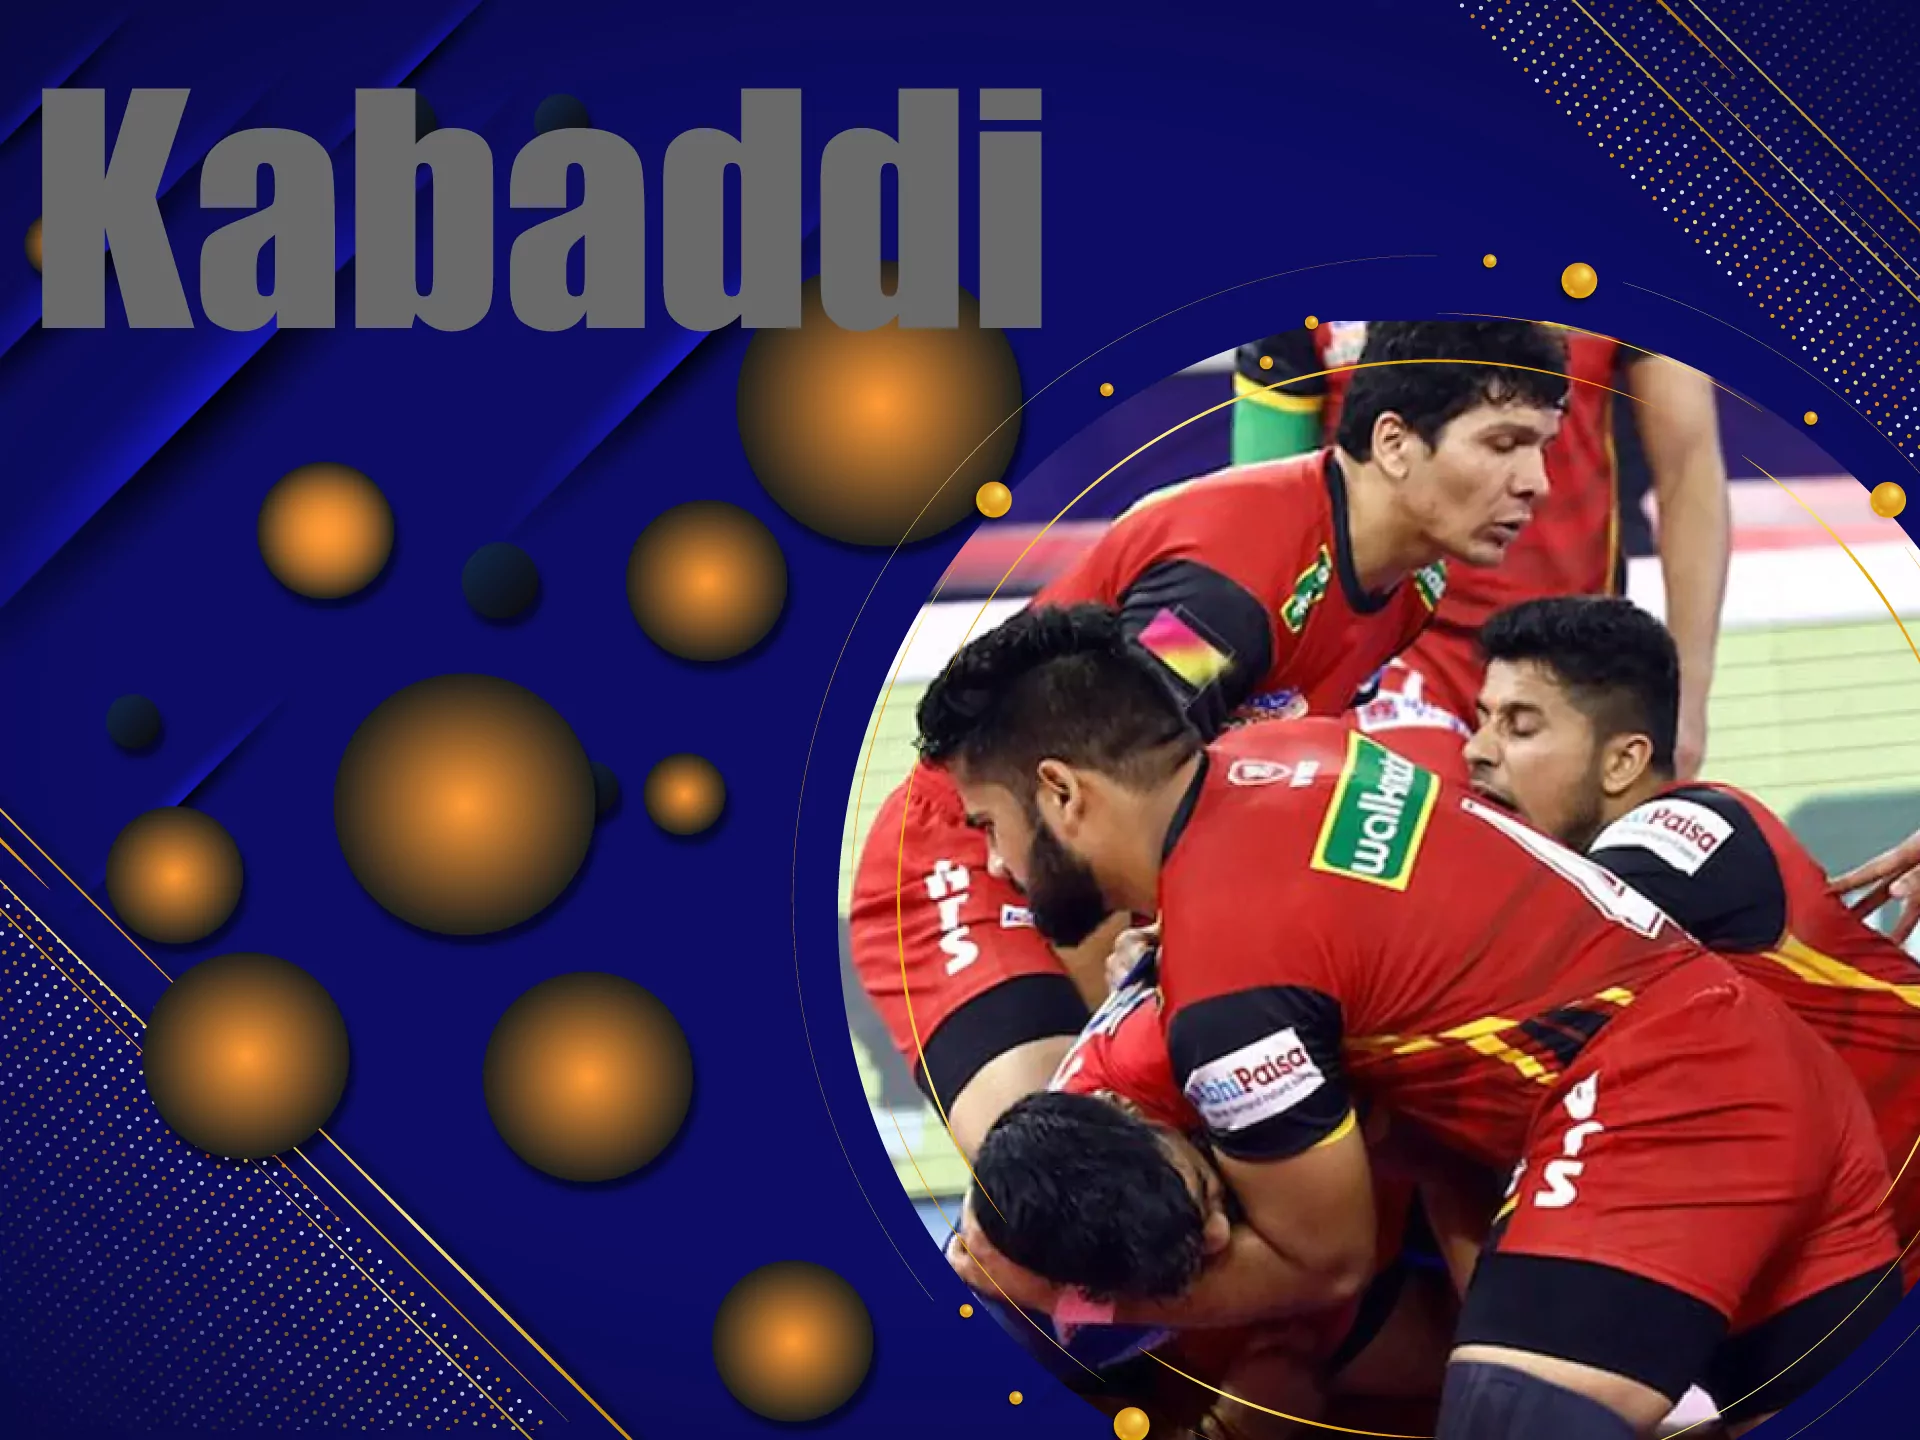 You can also bet on the kabaddi events in the ICCWIN application.